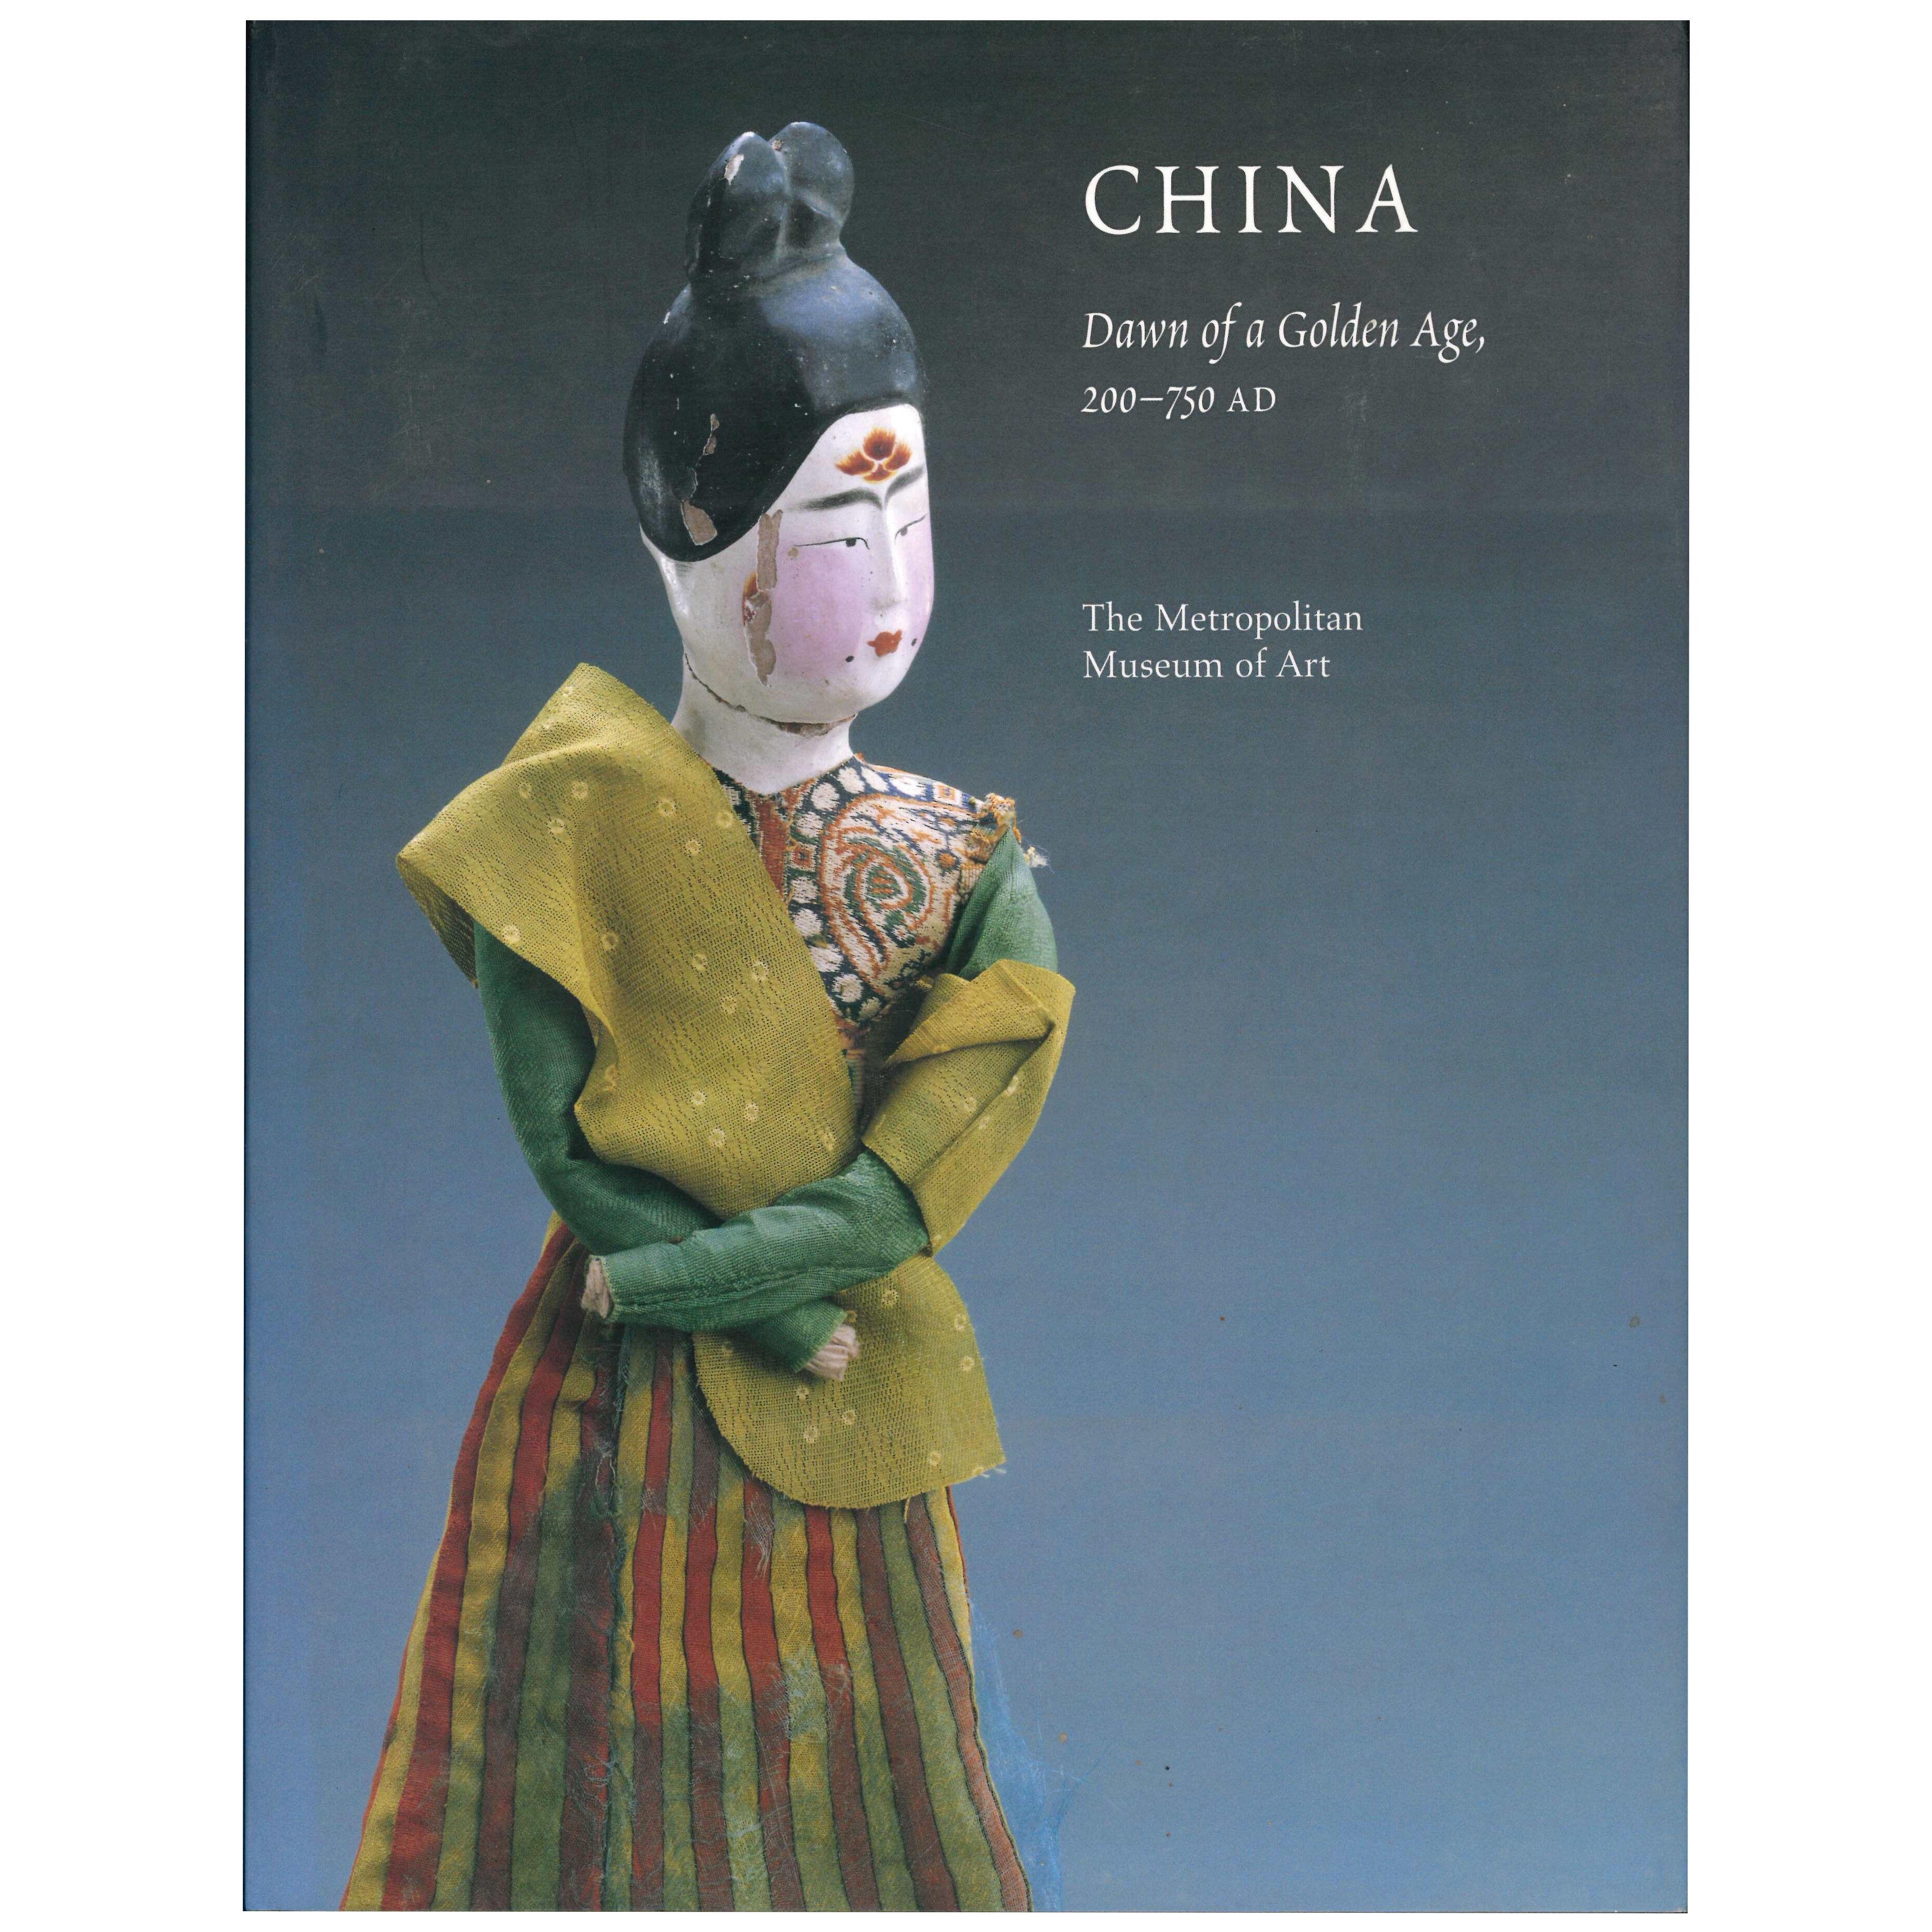 CHINA - Dawn of a Golden Age 200-750 AD. Book